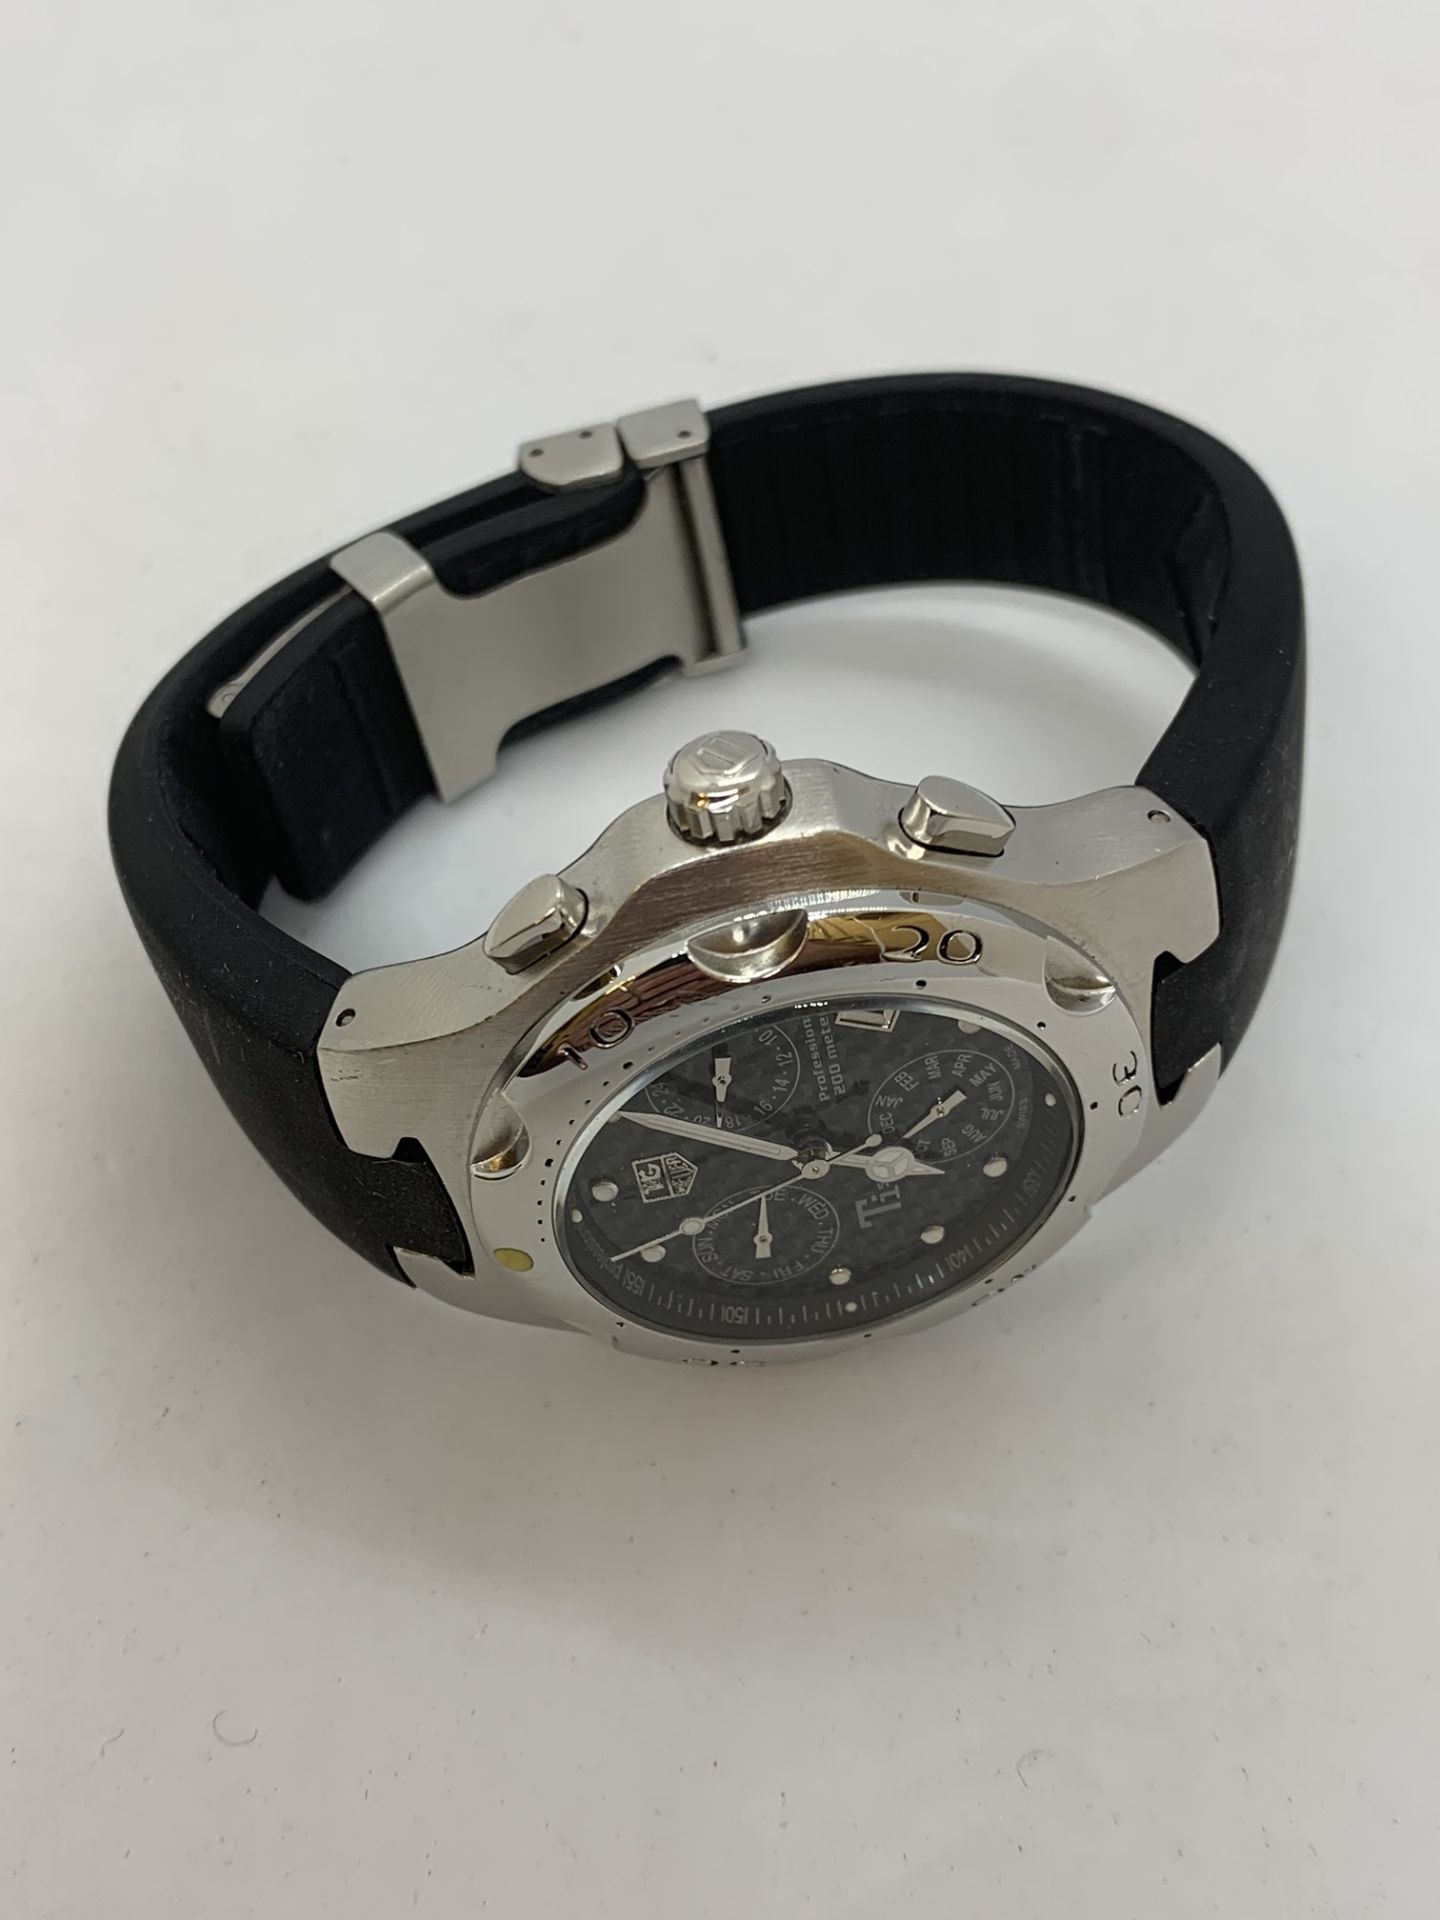 TAG HEUER PROFESSIONAL CHRONO AUTOMATIC WATCH - 200 METERS - Image 2 of 11